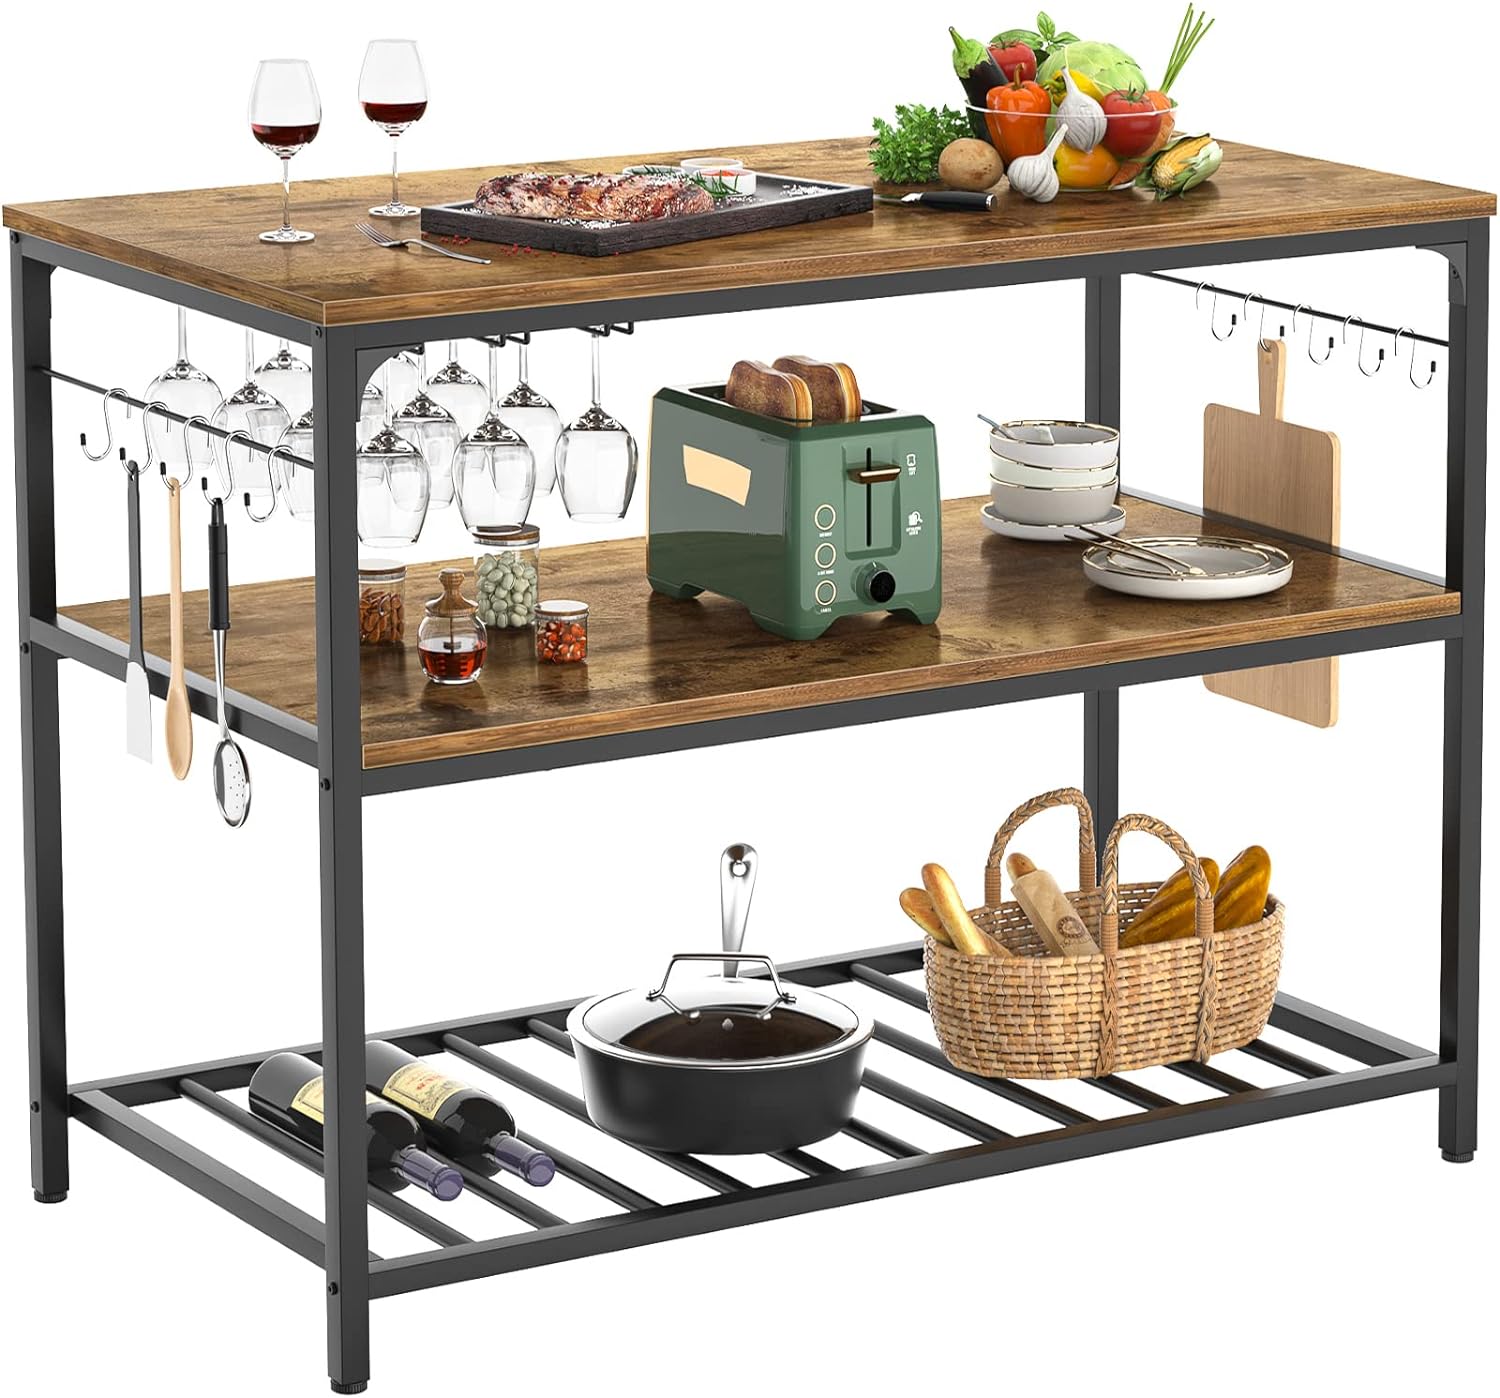 Homieasy Kitchen Island with Wine Glass Holder, Industrial Wood and Metal Coffee Bar Rack, 3 Tier Spacious Prep Table Extended Counter with Hooks Easy to Assemble, Rustic Brown